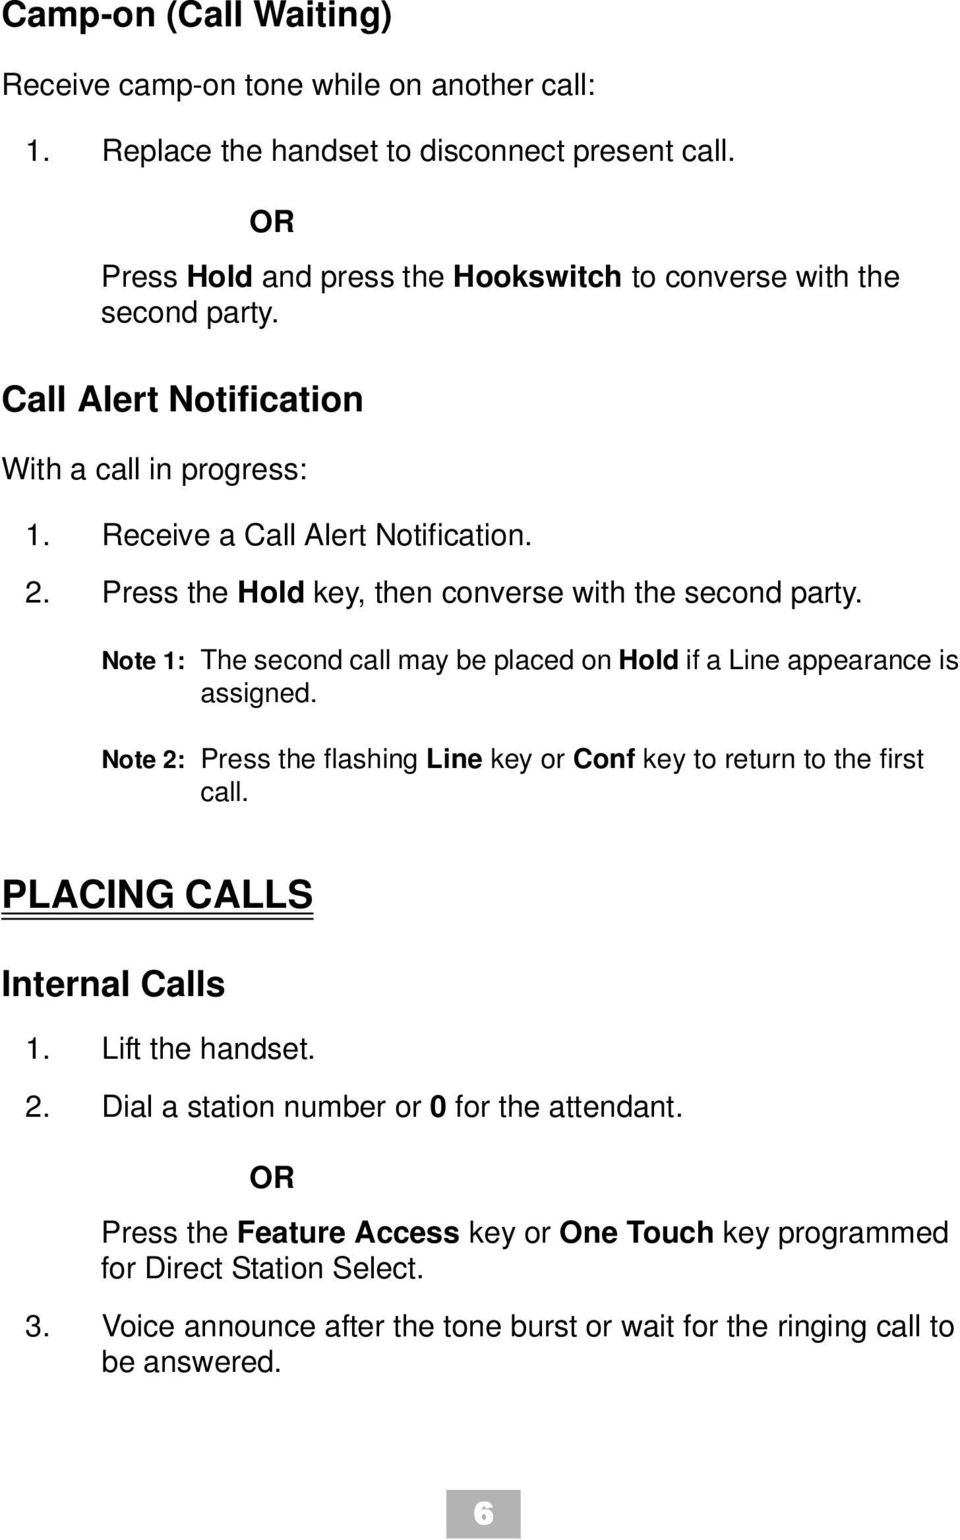 Note 1: The second call may be placed on Hold if a Line appearance is assigned. Note 2: Press the flashing Line key or Conf key to return to the first call. PLACING CALLS Internal Calls 1.